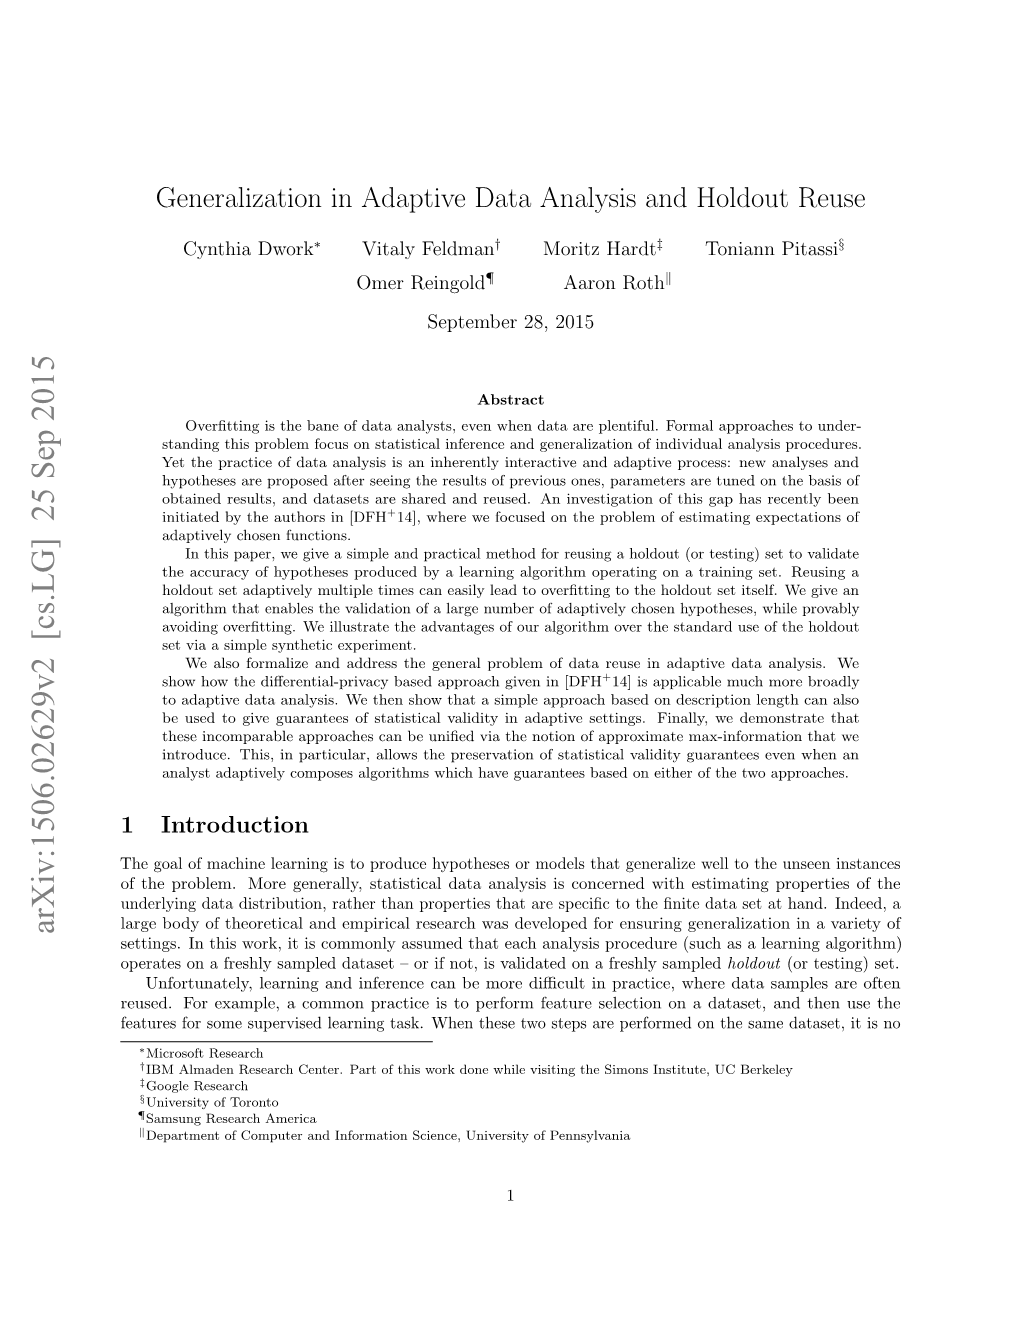 Generalization in Adaptive Data Analysis and Holdout Reuse